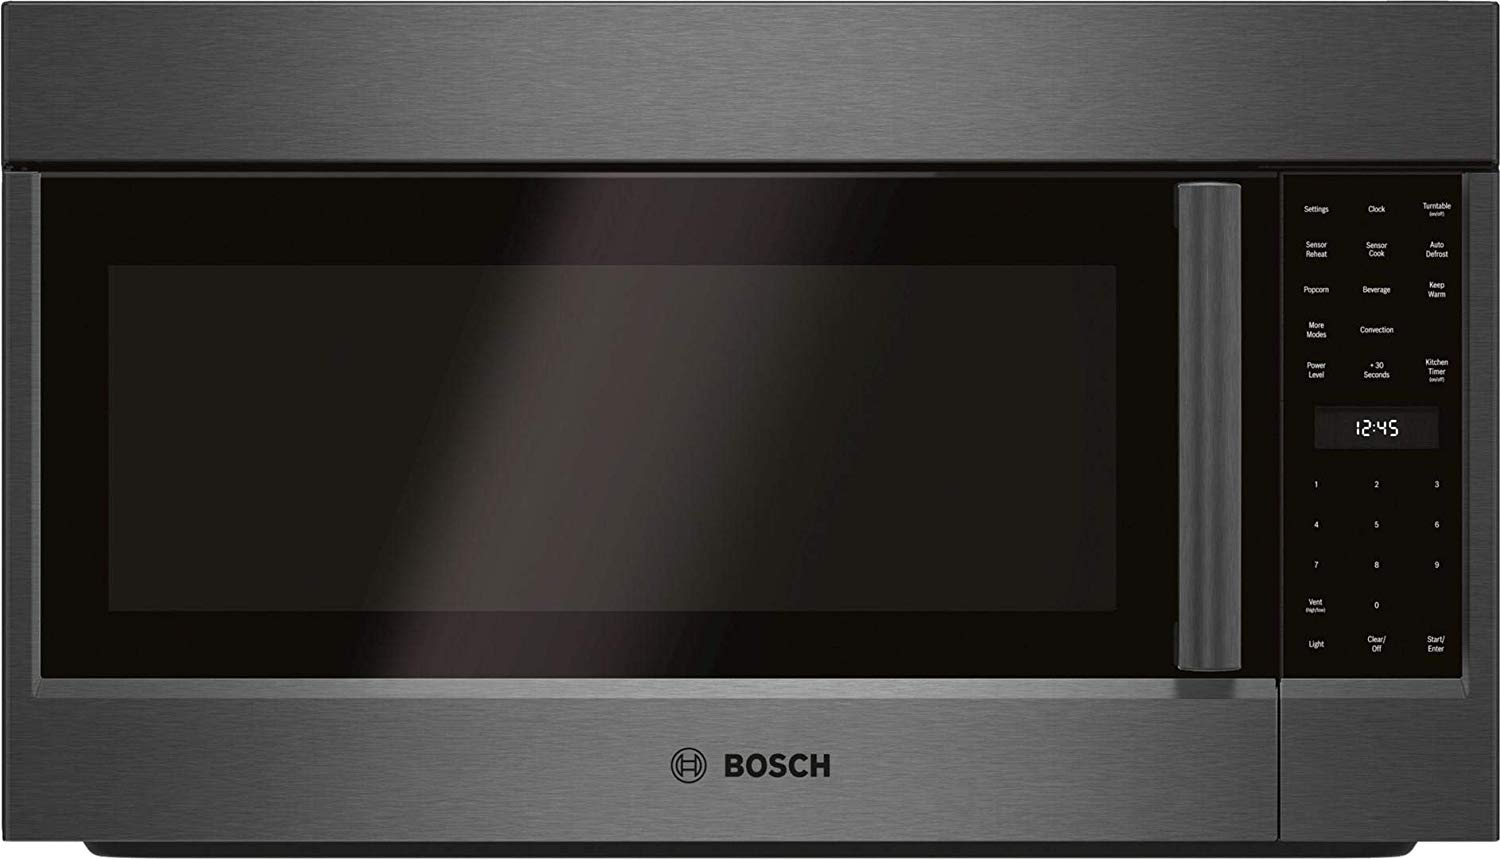 Bosch 800 Series 30" Over-the-range Convection Microwave, Hmv8044u, Black Stainless Steel